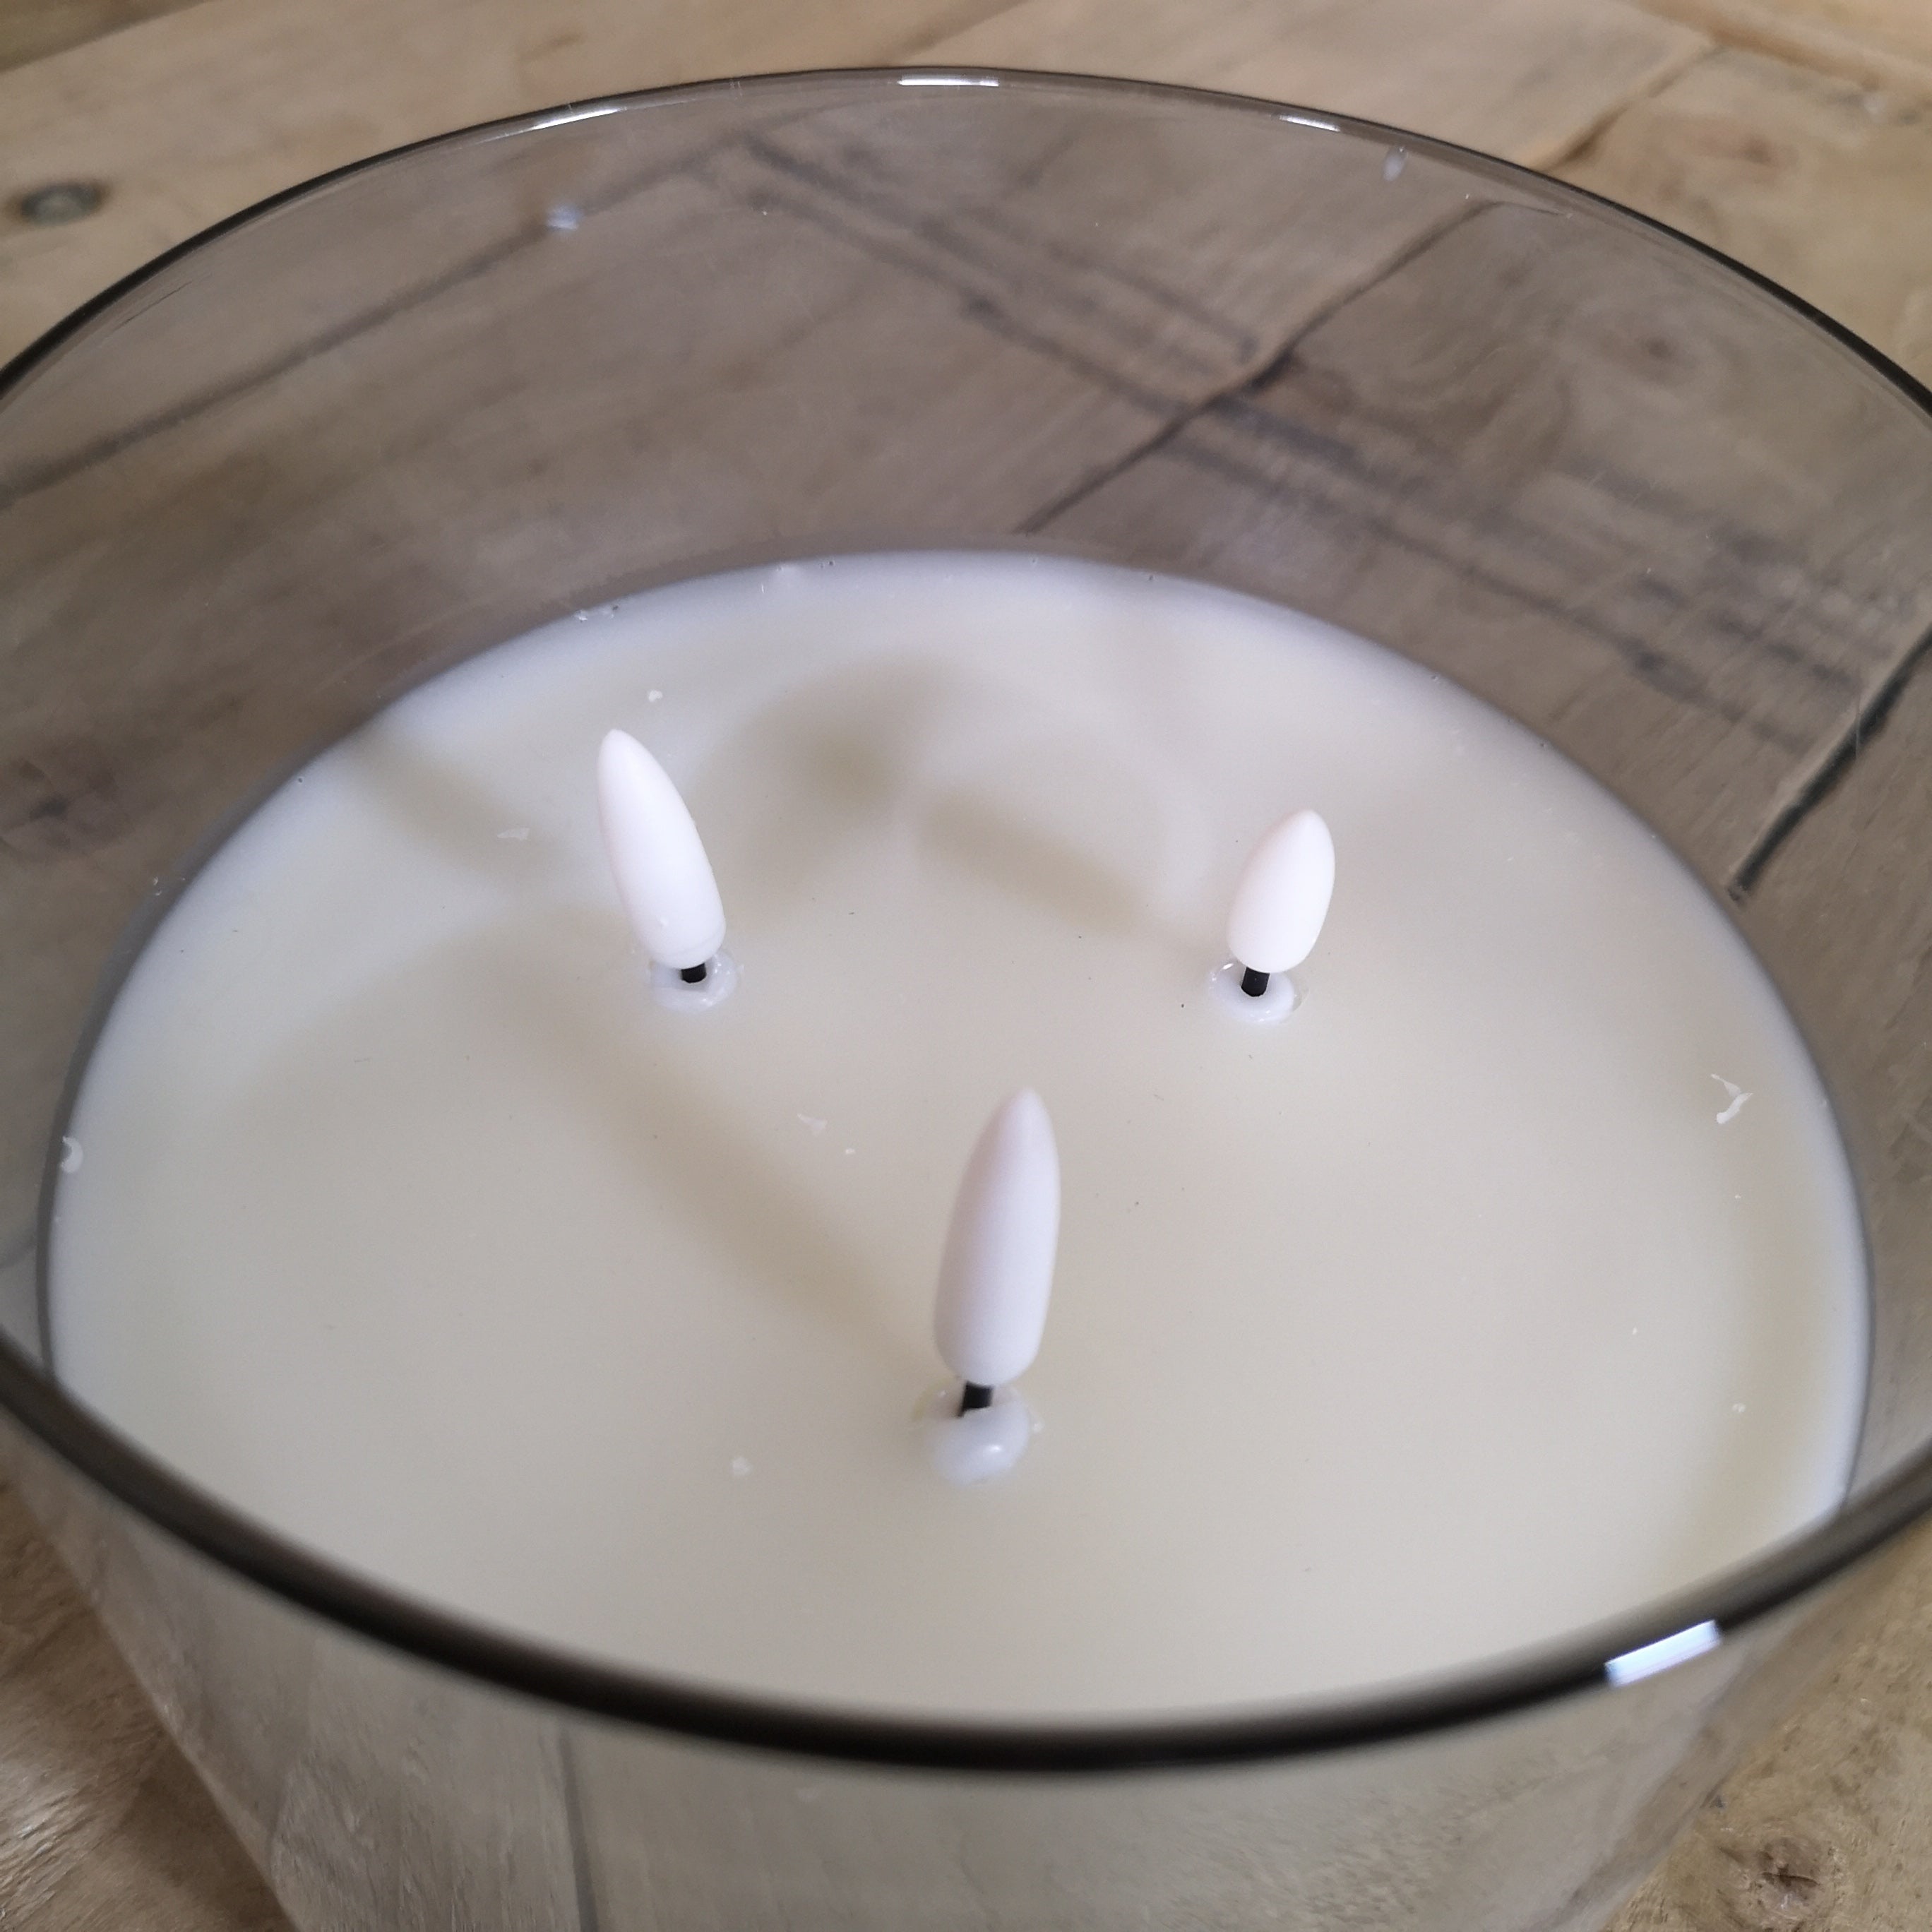 15 x15cm Triple Flame Real Wax Christmas Candle in Smoke Grey Glass with Timer, Dimmer and Remote